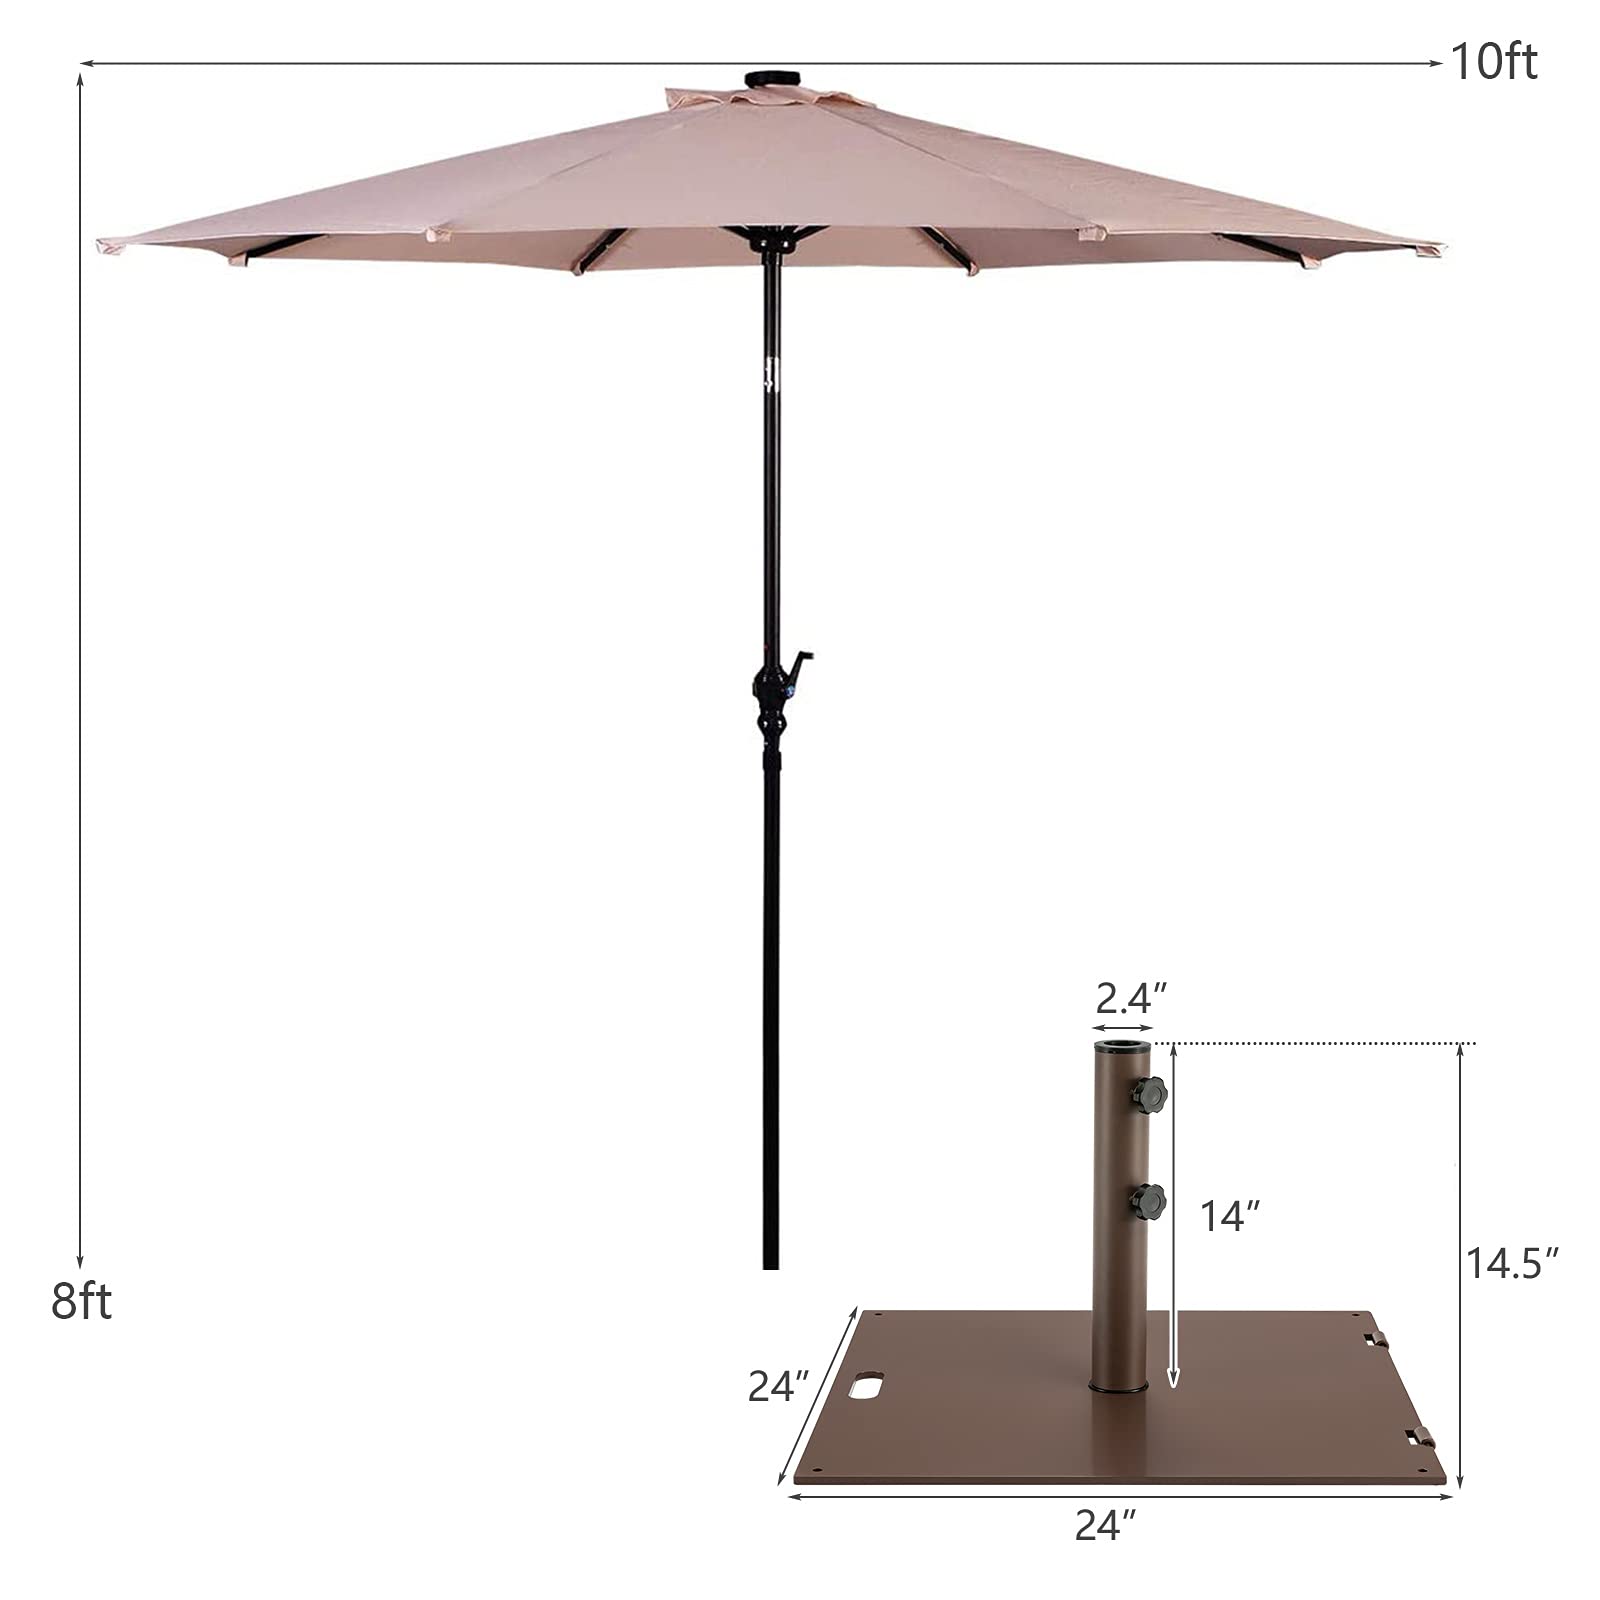 Giantex Patio Umbrella with Base Stand, 10ft Solar Led Lights Outdoor Umbrella and 50 LBS Steel Umbrella Base Stand w/ Wheels